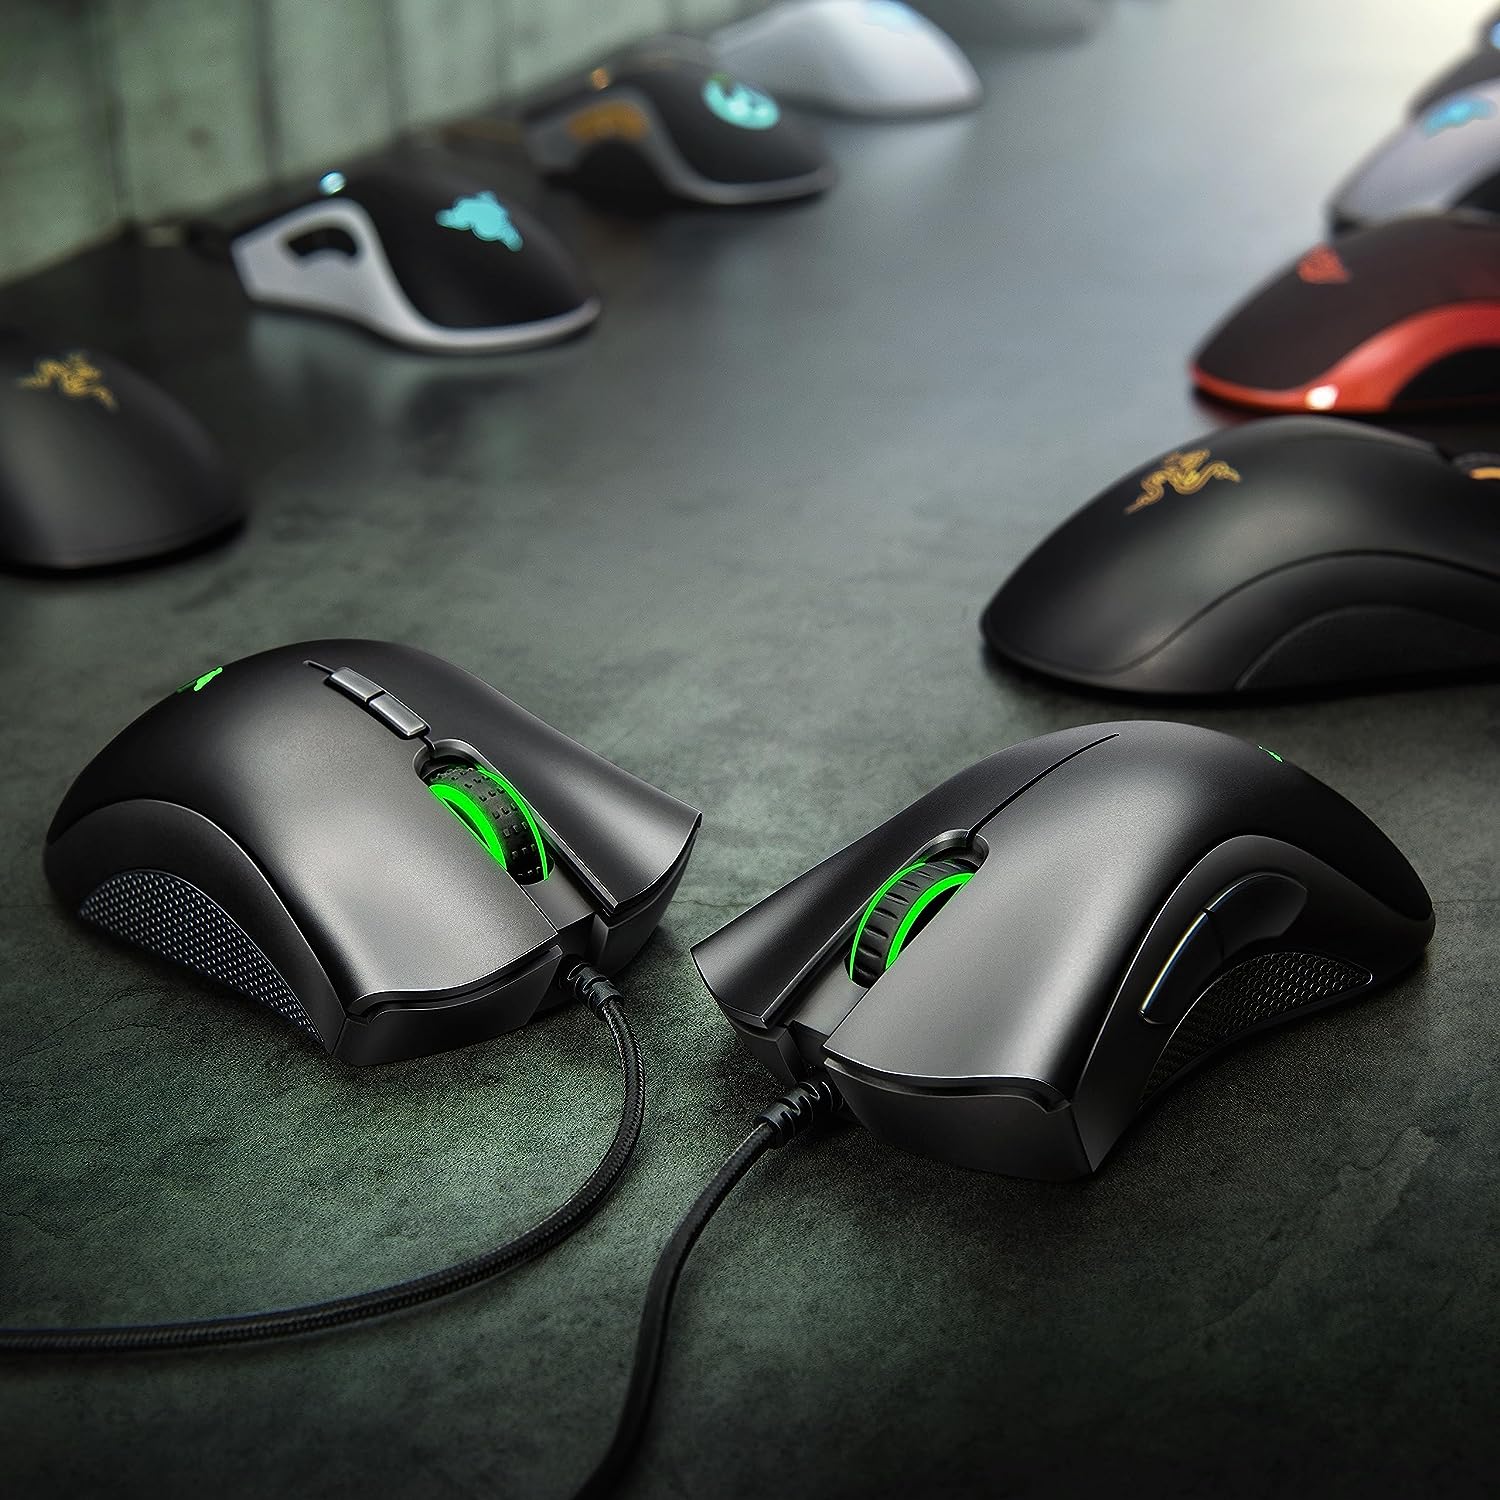 Razer DeathAdder Essential Gaming Mouse: 6400 DPI Optical Sensor - 5 Programmable Buttons - Mechanical Switches - Rubber Side Grips - Mercury White - Geek Tech